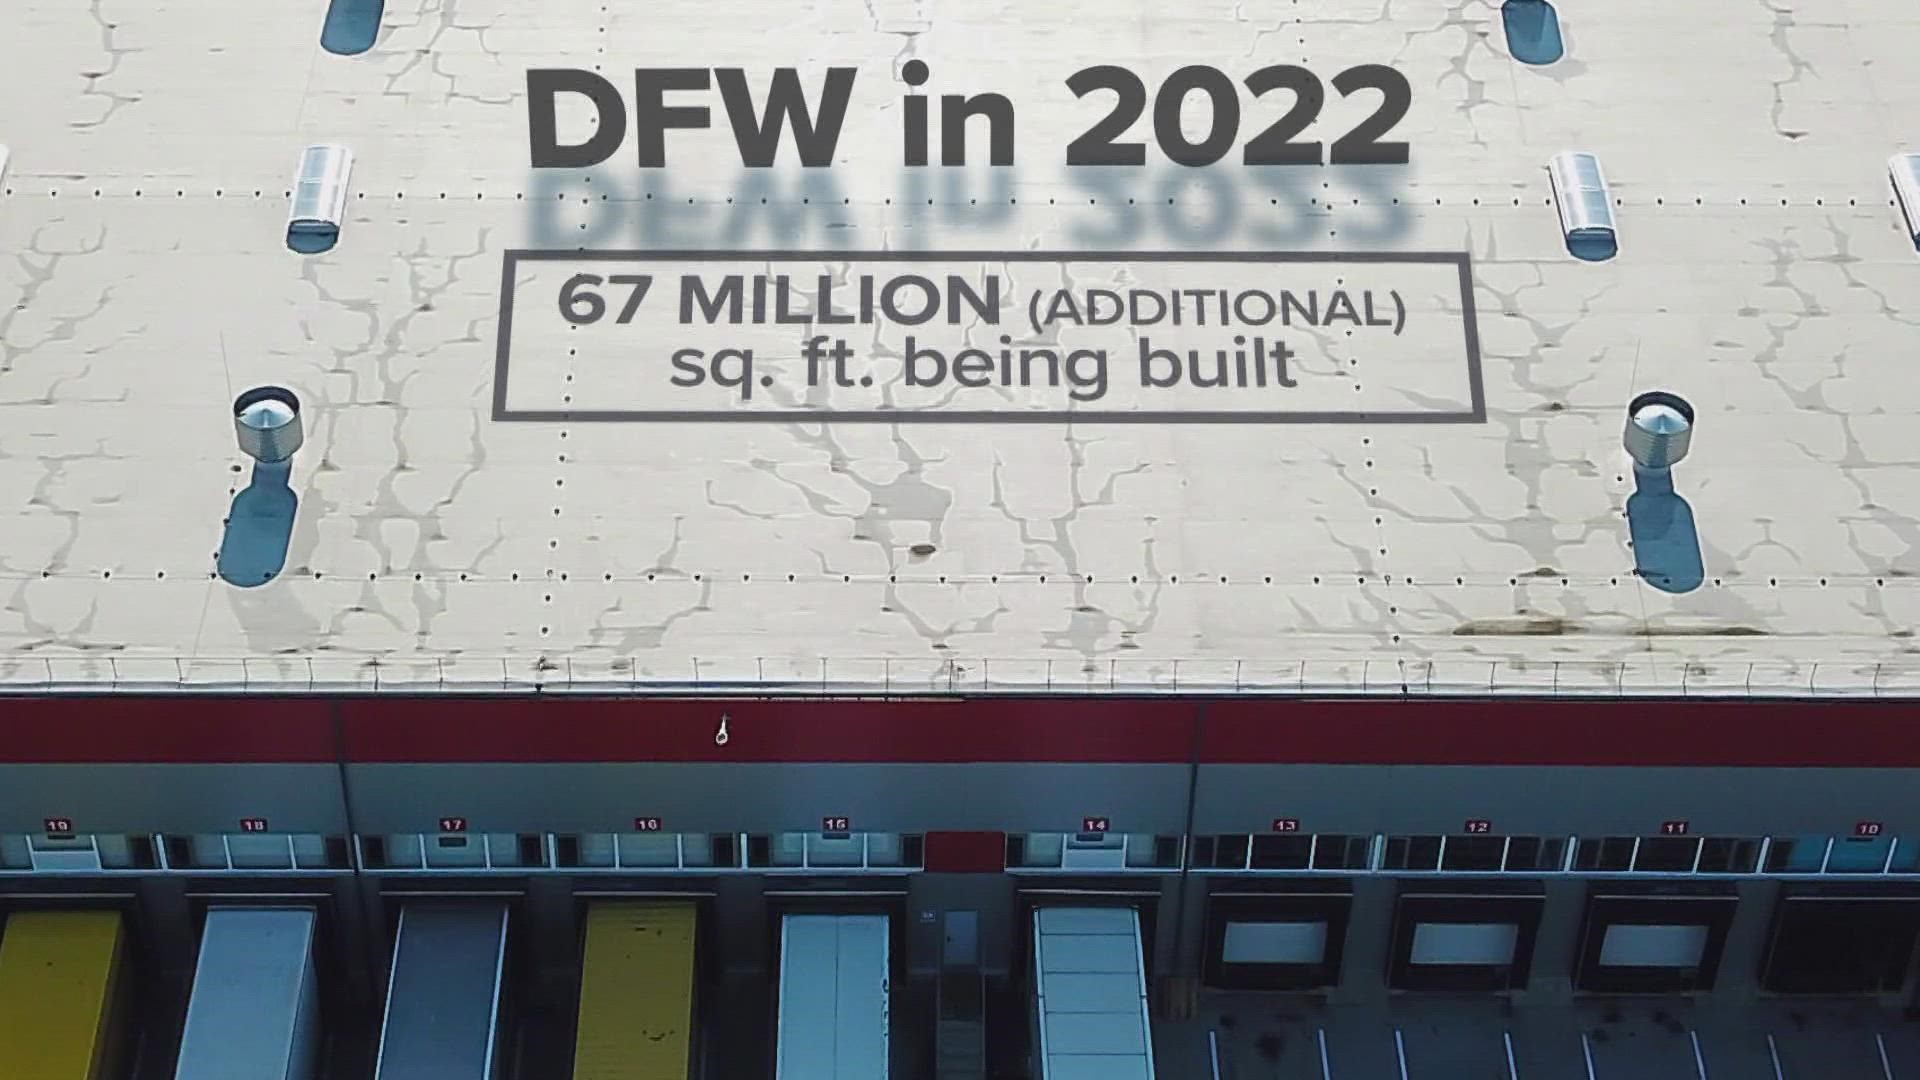 Dallas-Fort Worth is becoming the capital of behemoth buildings.